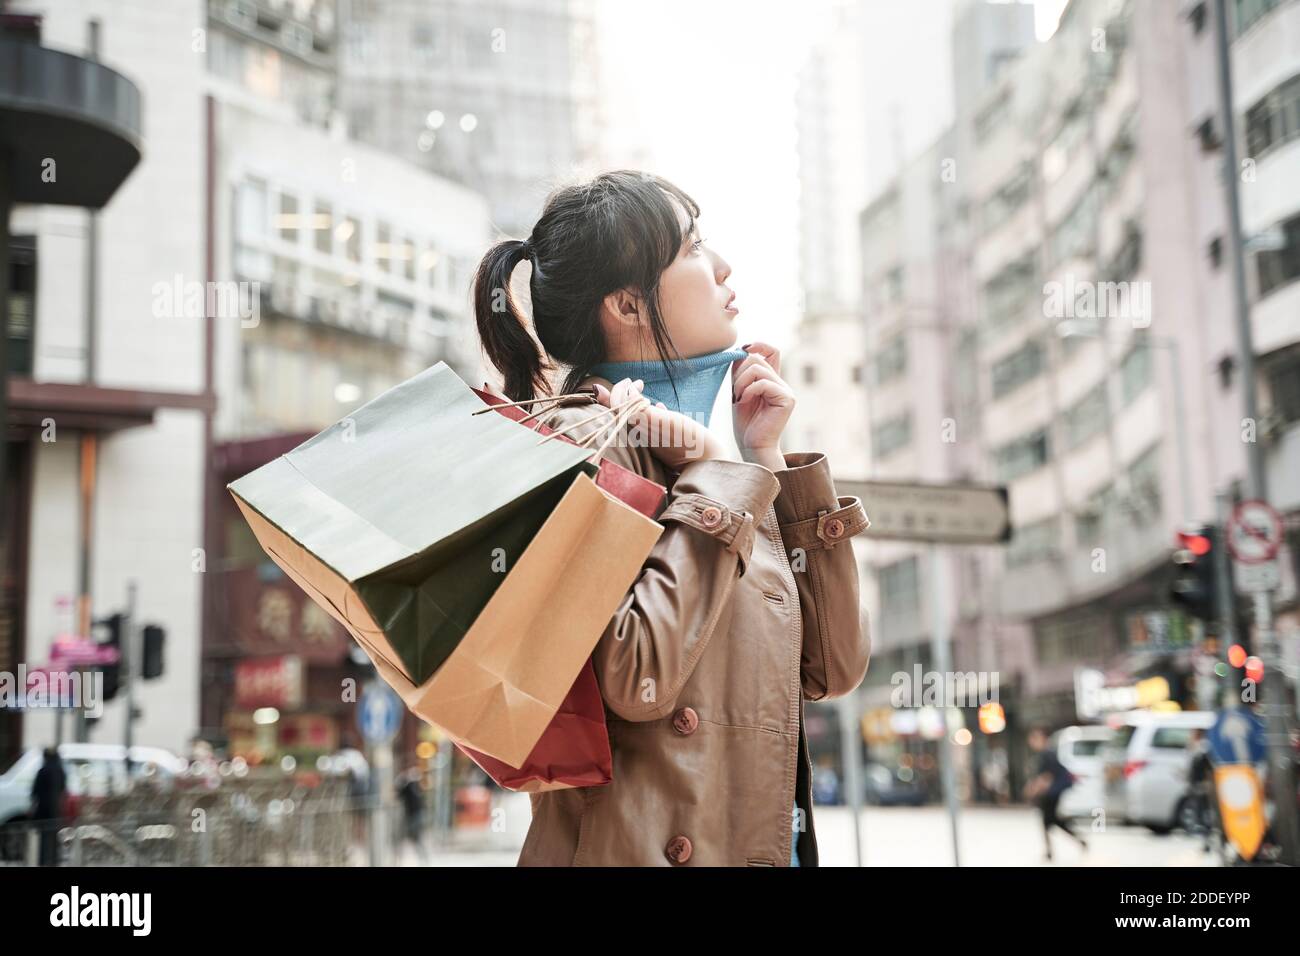 young asian woman carrying shopping bags walking on city street Stock Photo